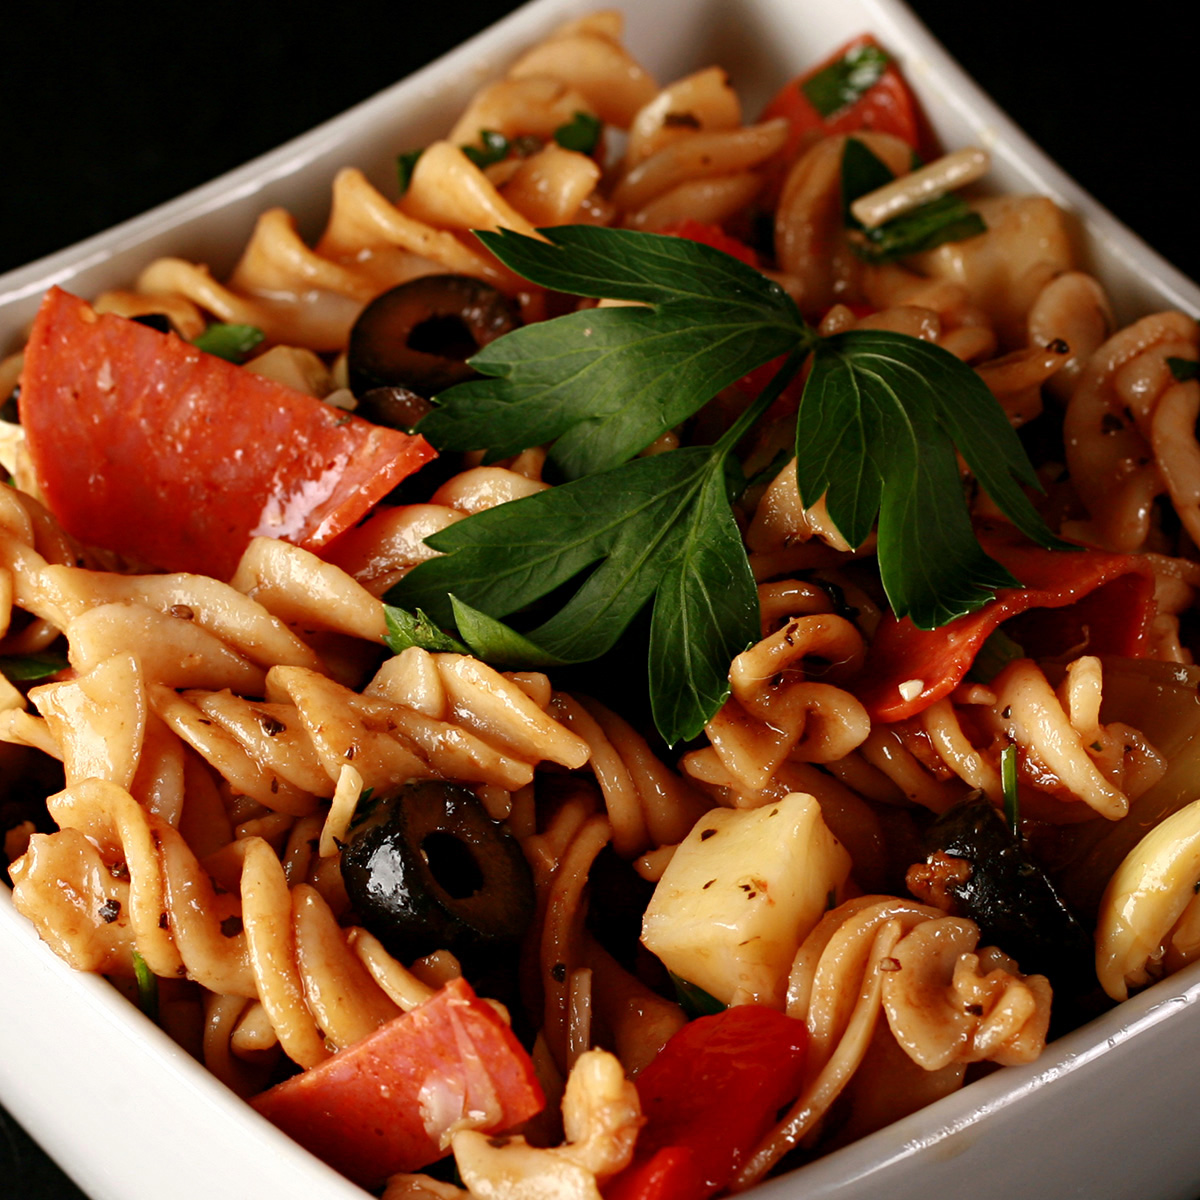 A rich looking pasta salad in a white bowl. Spiral noodles are shown lgthly coated in a thin red sauce, with pepperoni, artichoked, black olives, cheese, and parsley visible.